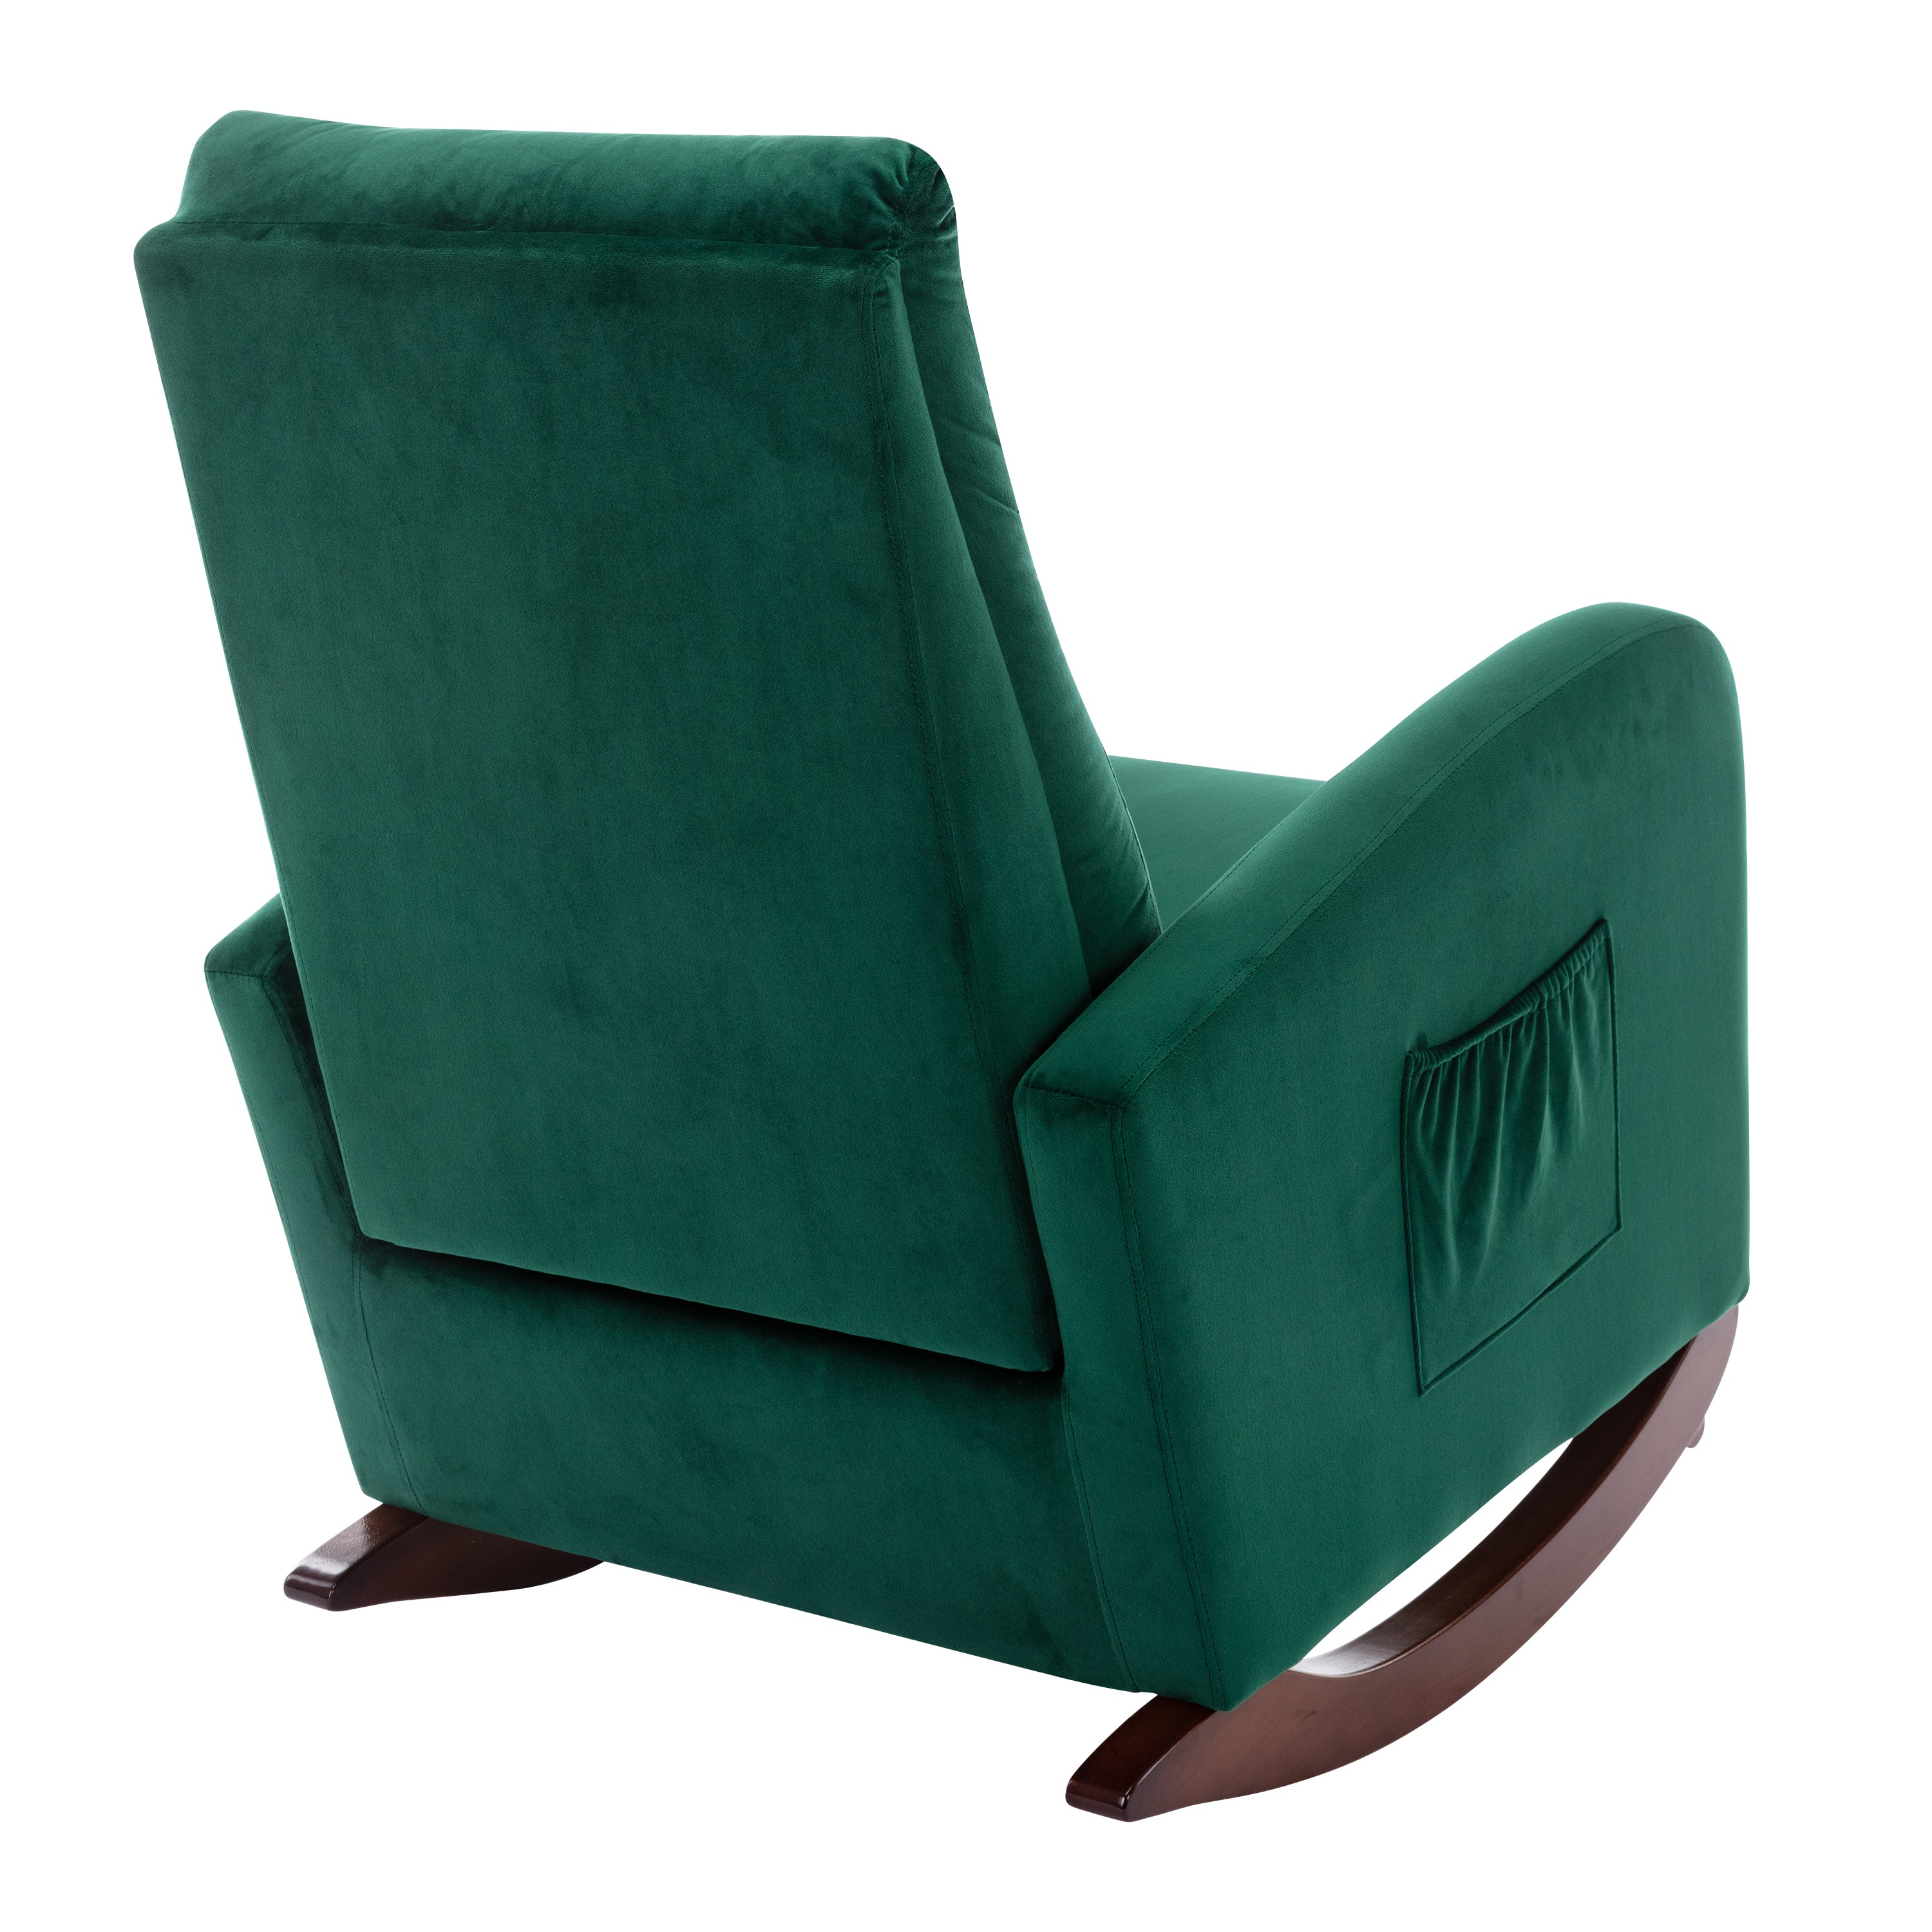 High Back Rocking Chair Nursery Chair with Thick Padded Seat & Side Pockets, Green